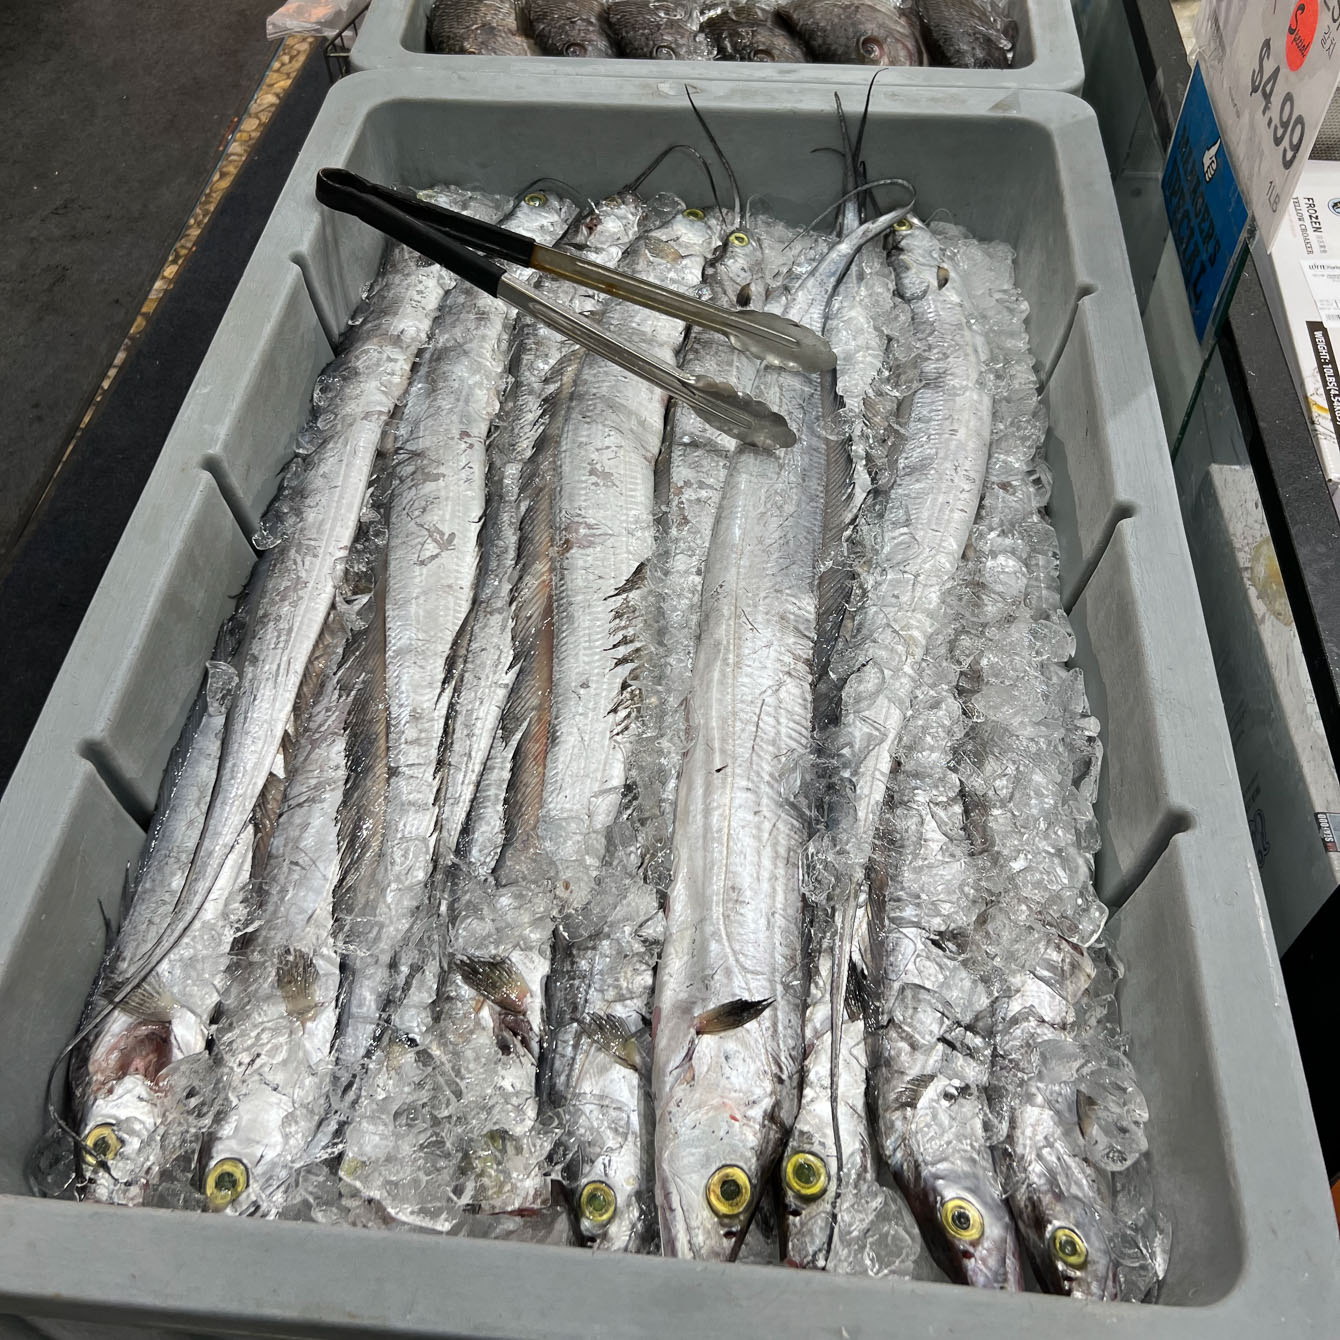 Silver belt fishes are laid together on the ice in a tray